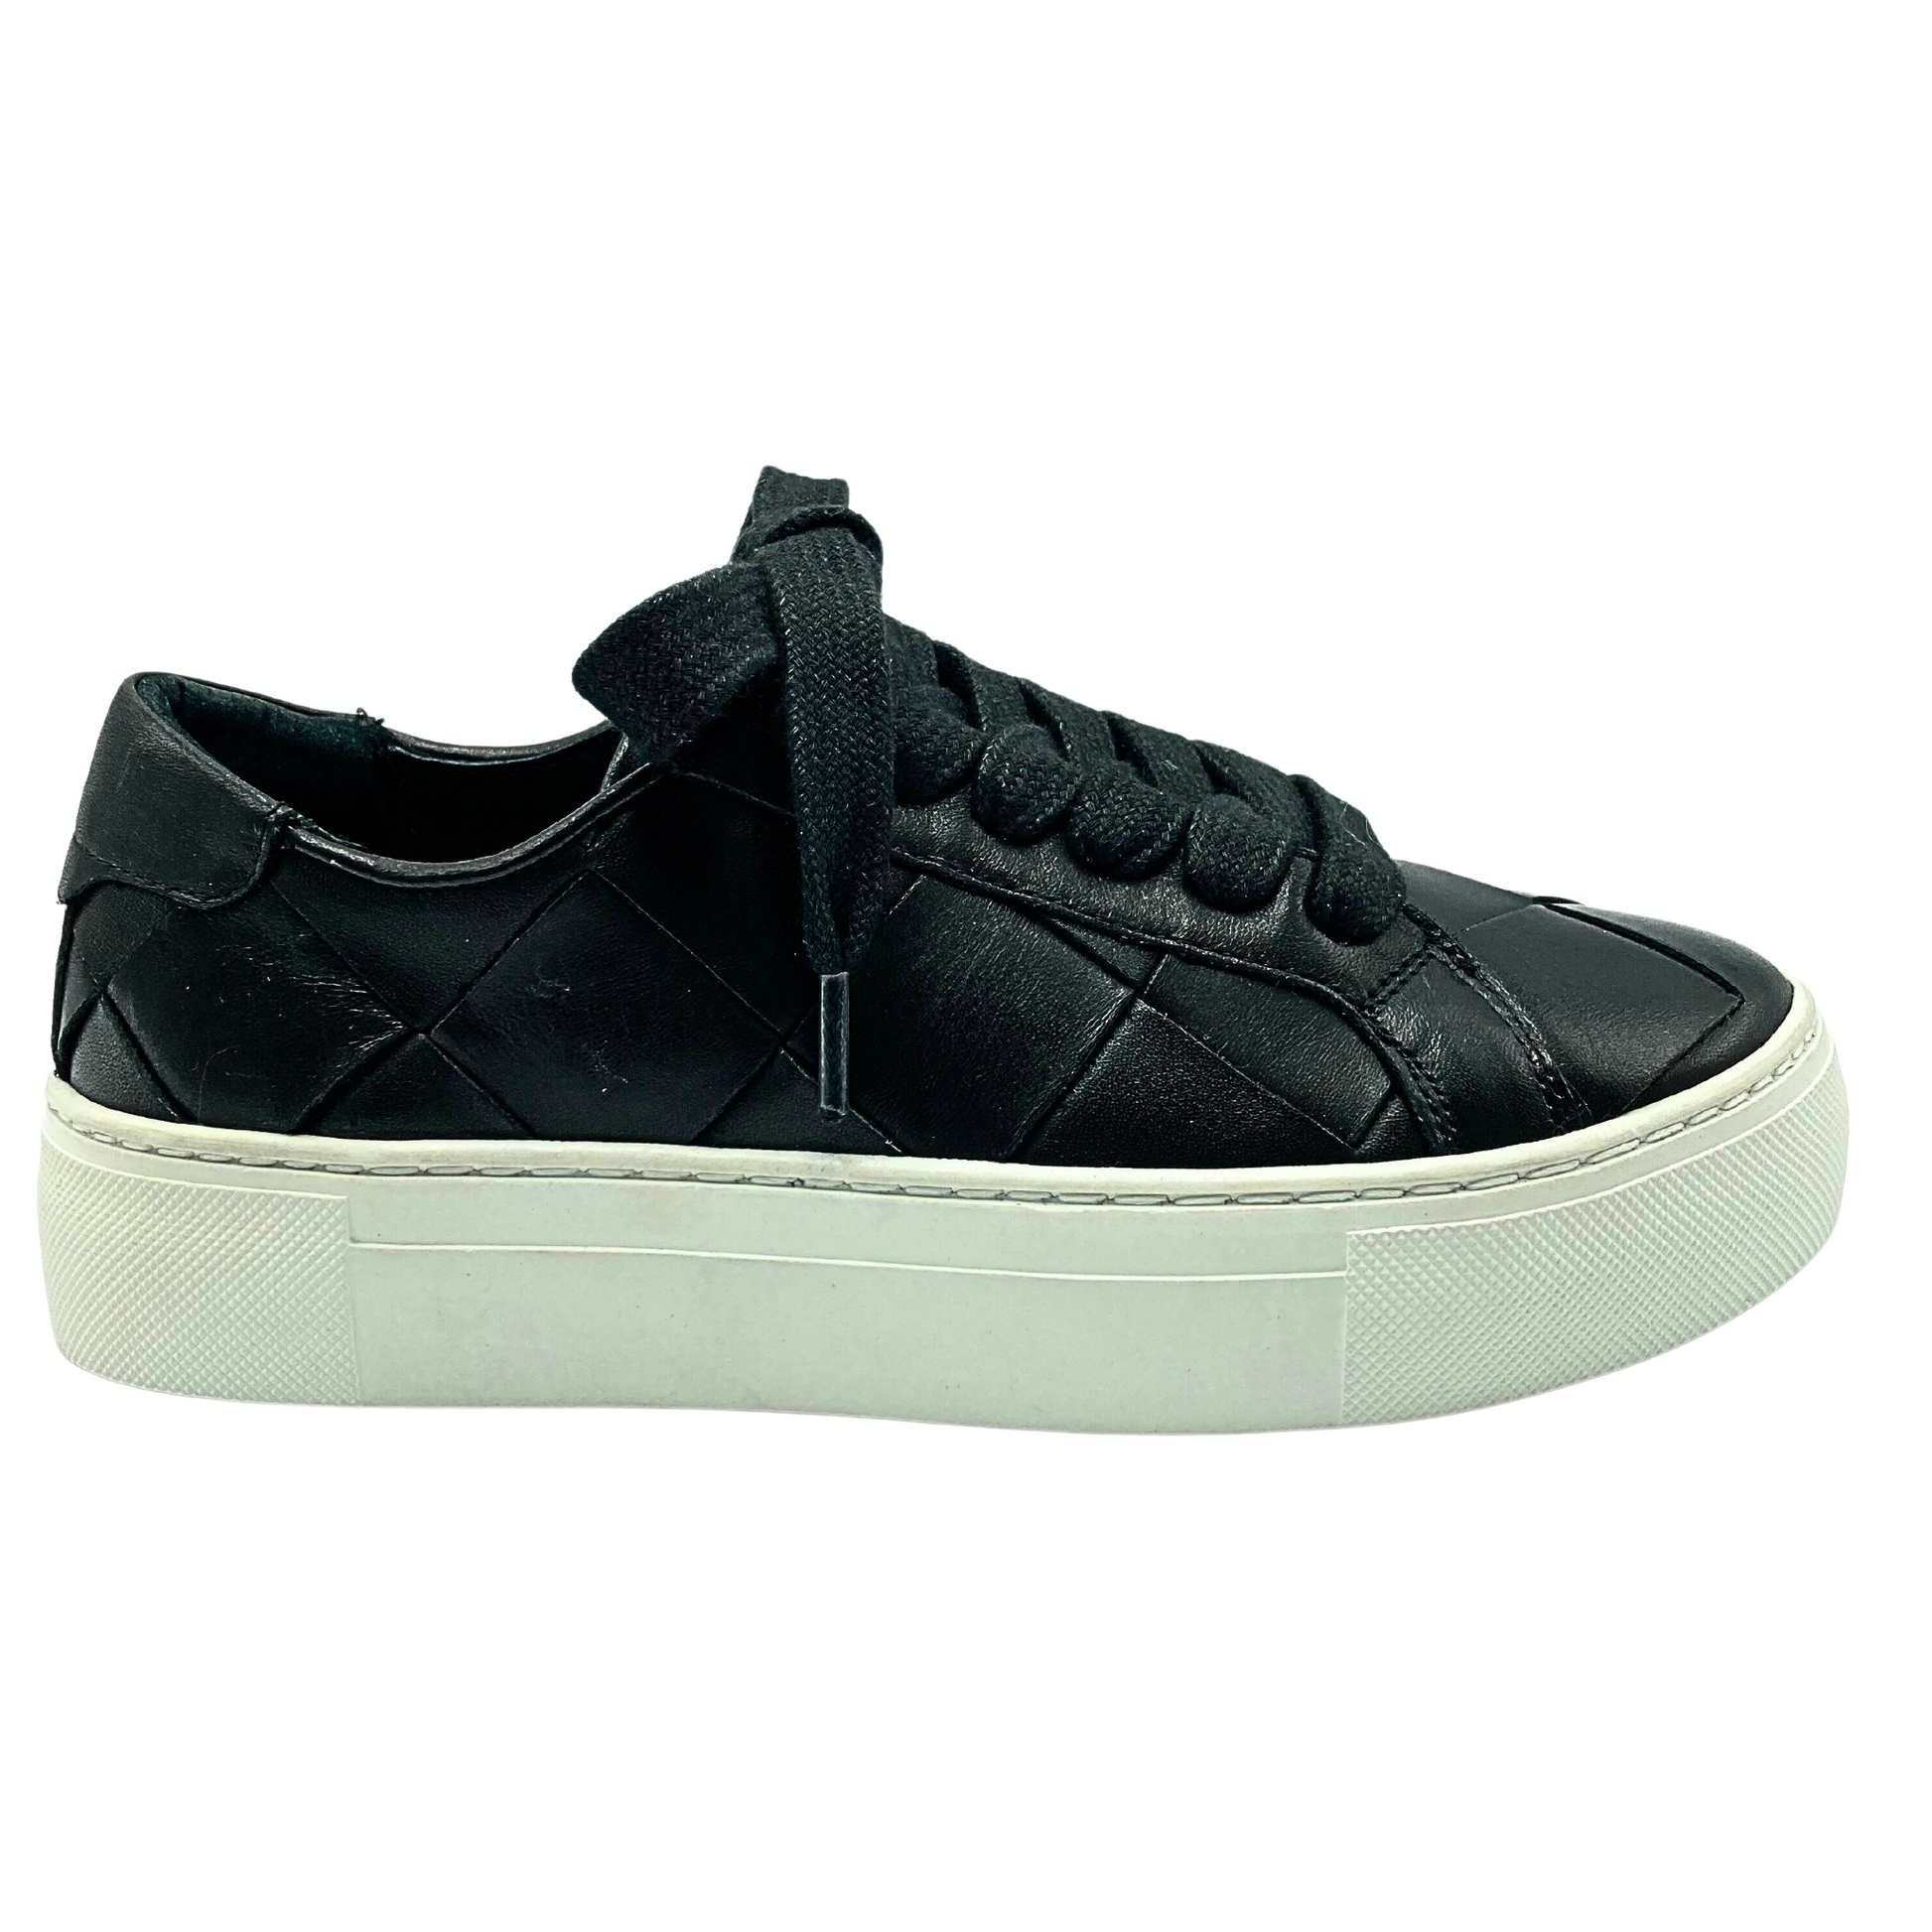 Outside view of a fashion sneaker done in a woven black leather with black laces and a soft white sole